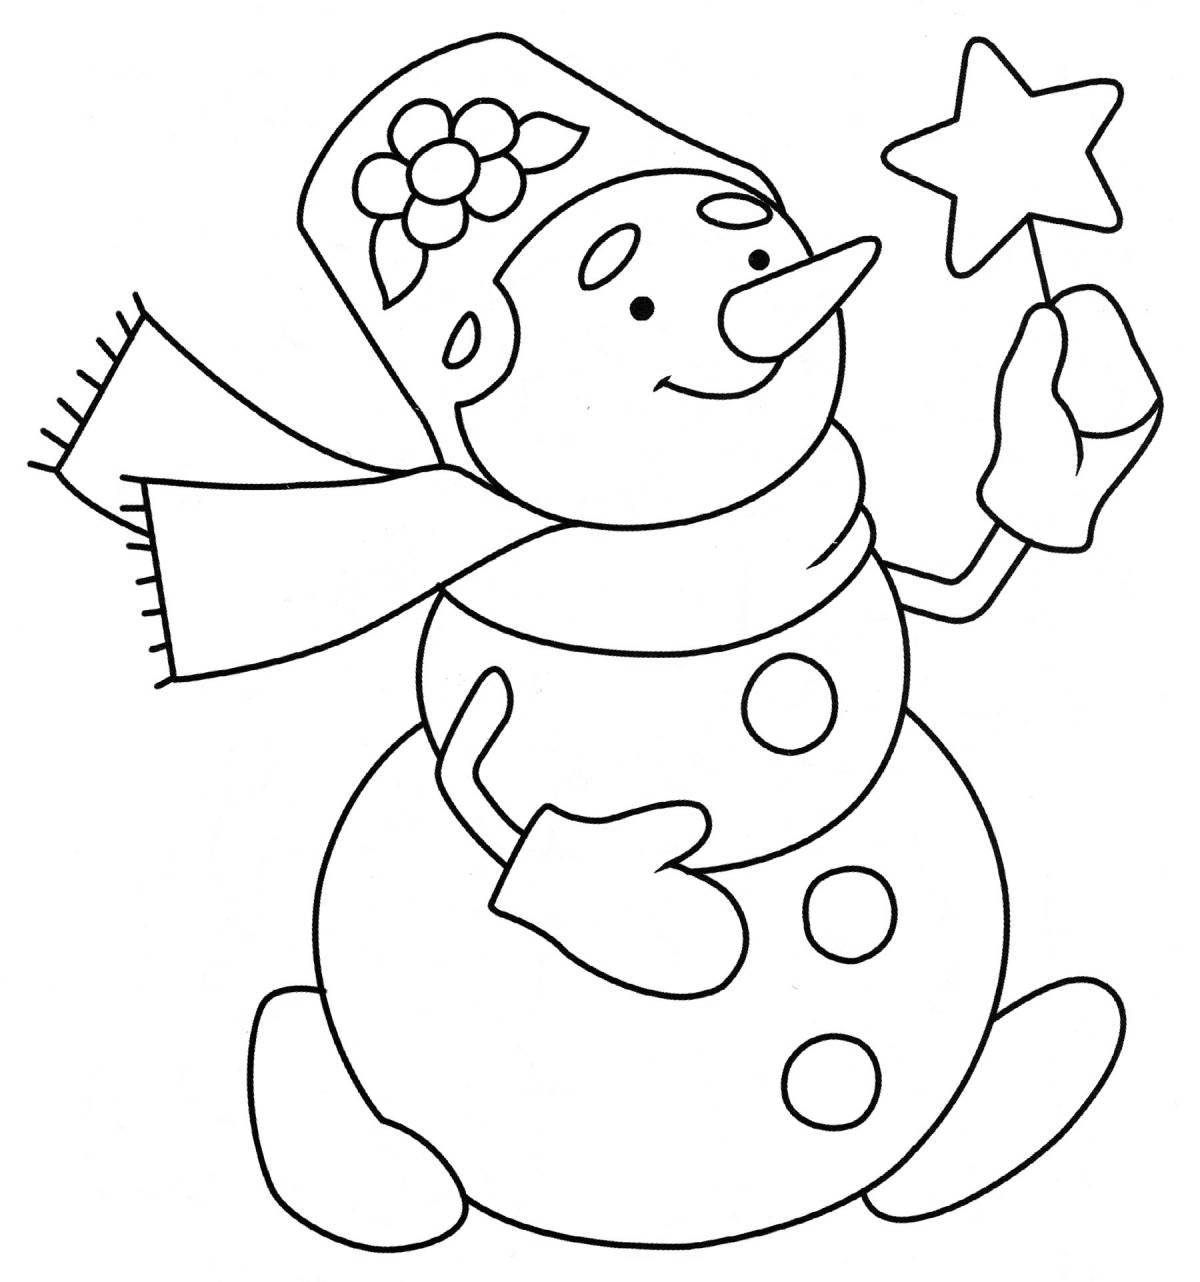 Bright coloring snowman for kids